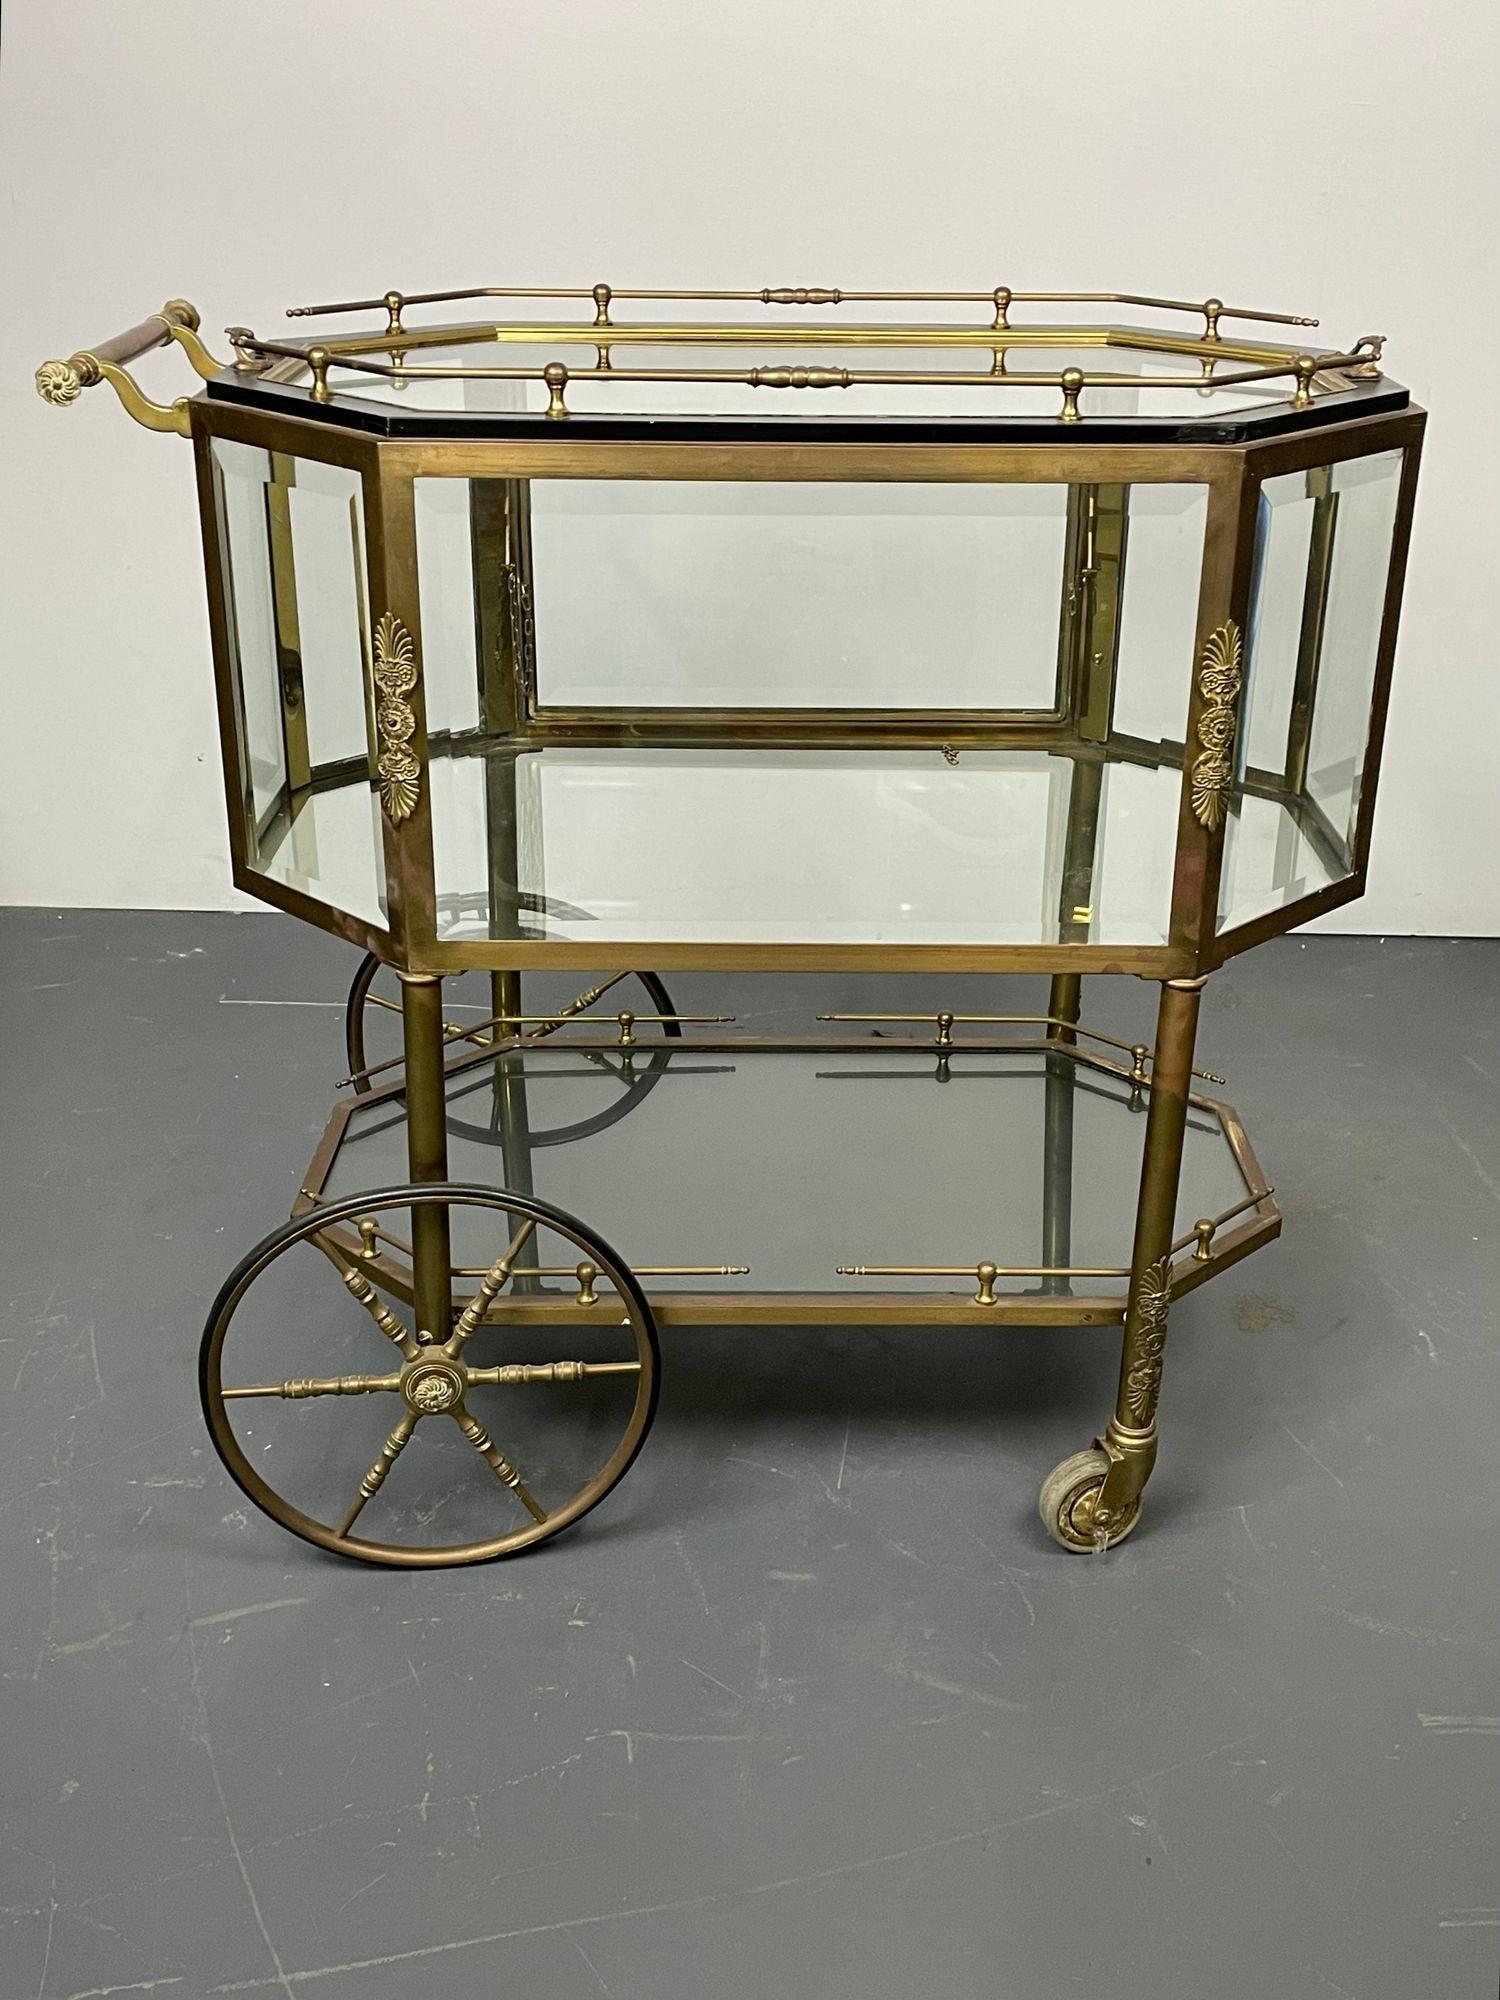 Hollywood Regency Beveled Glass, Bronze and Brass Tea Wagon or Serving Cart
Beveled glass and bronze tea wagon or serving cart. This wonderful Hollywood Regency style cart has small wheels in front with large wheels in back supporting a brass and